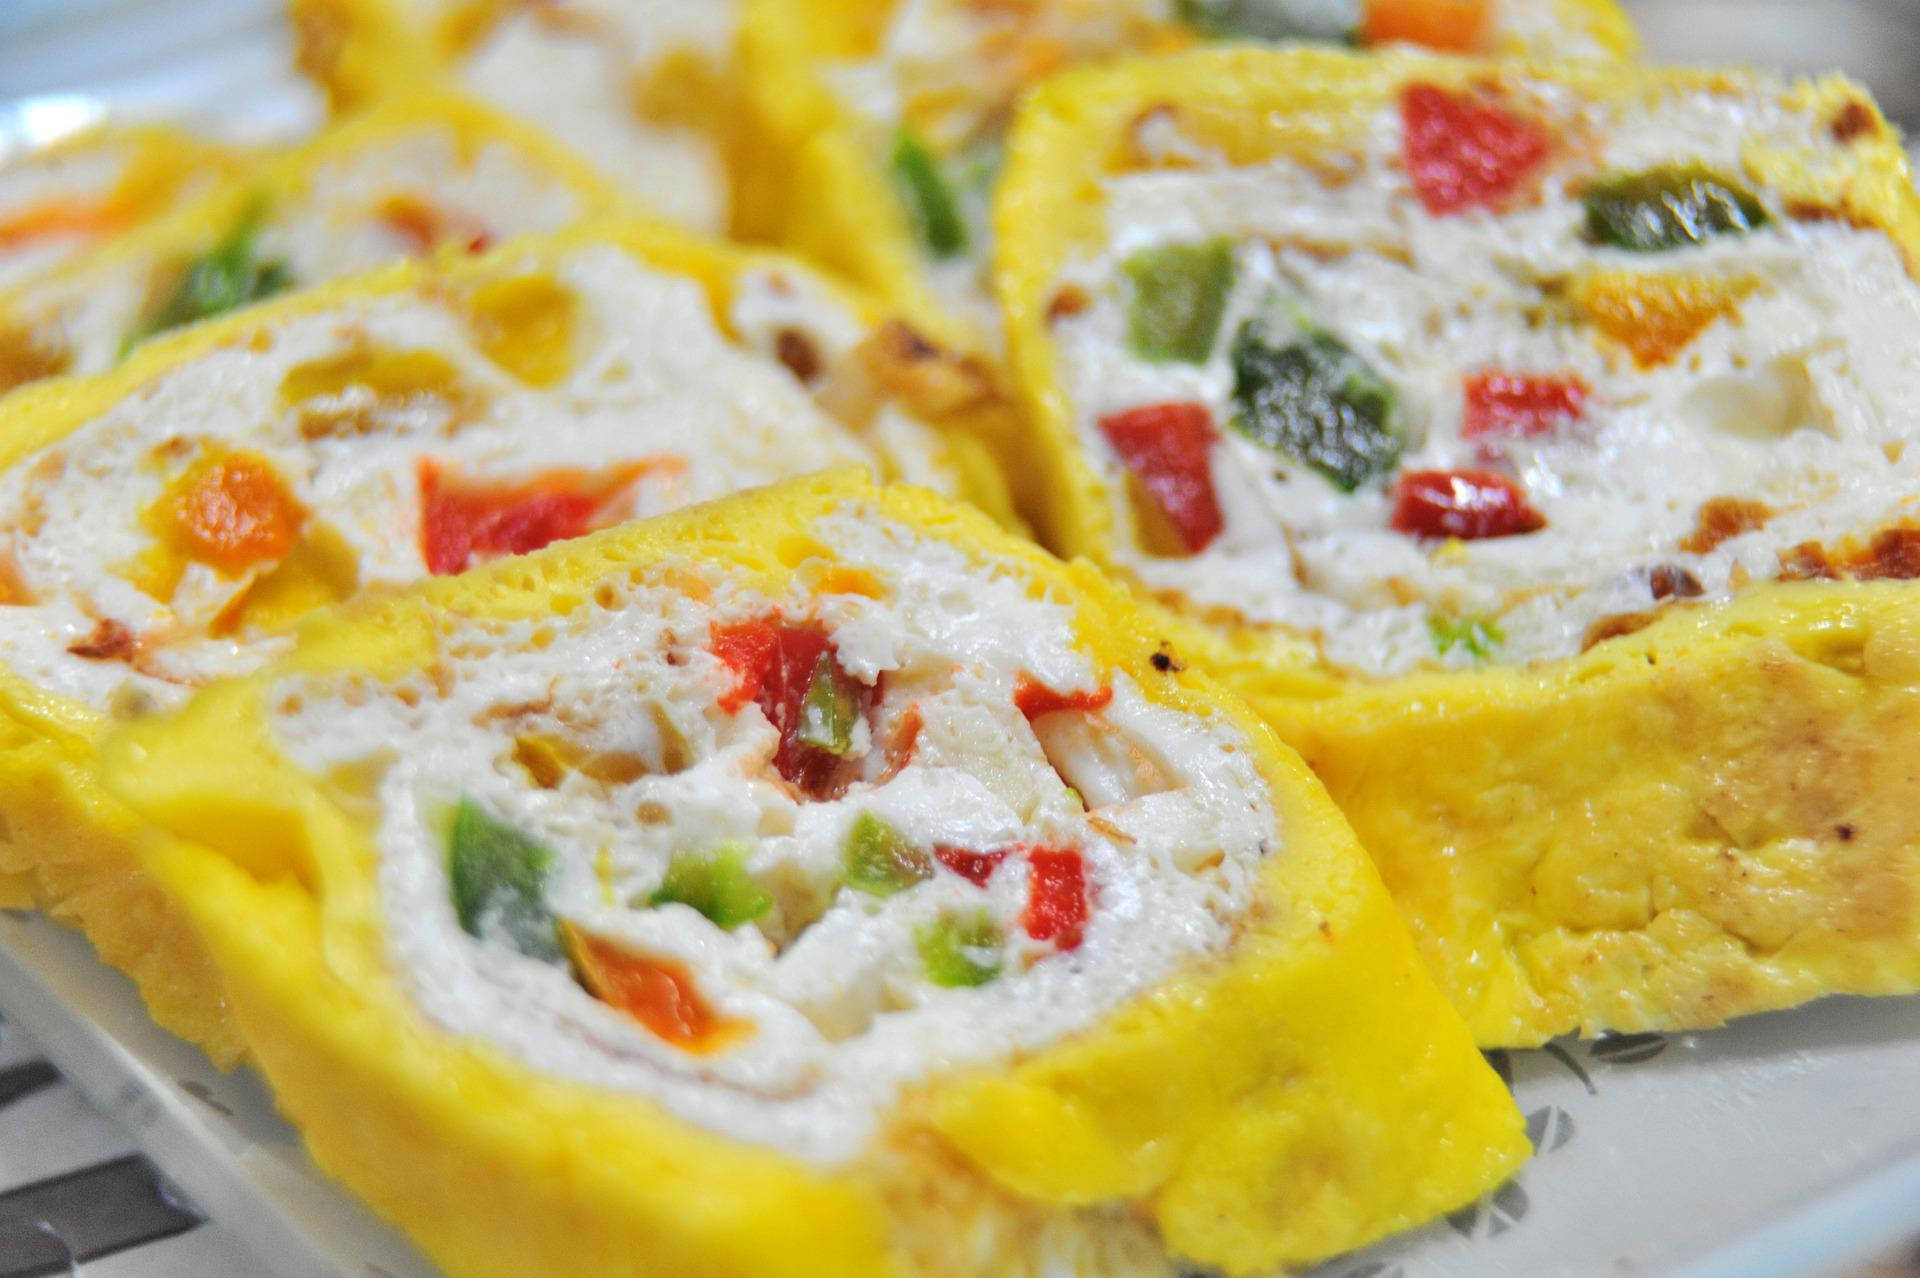 A Close-up Look At A Korean Egg Roll Background